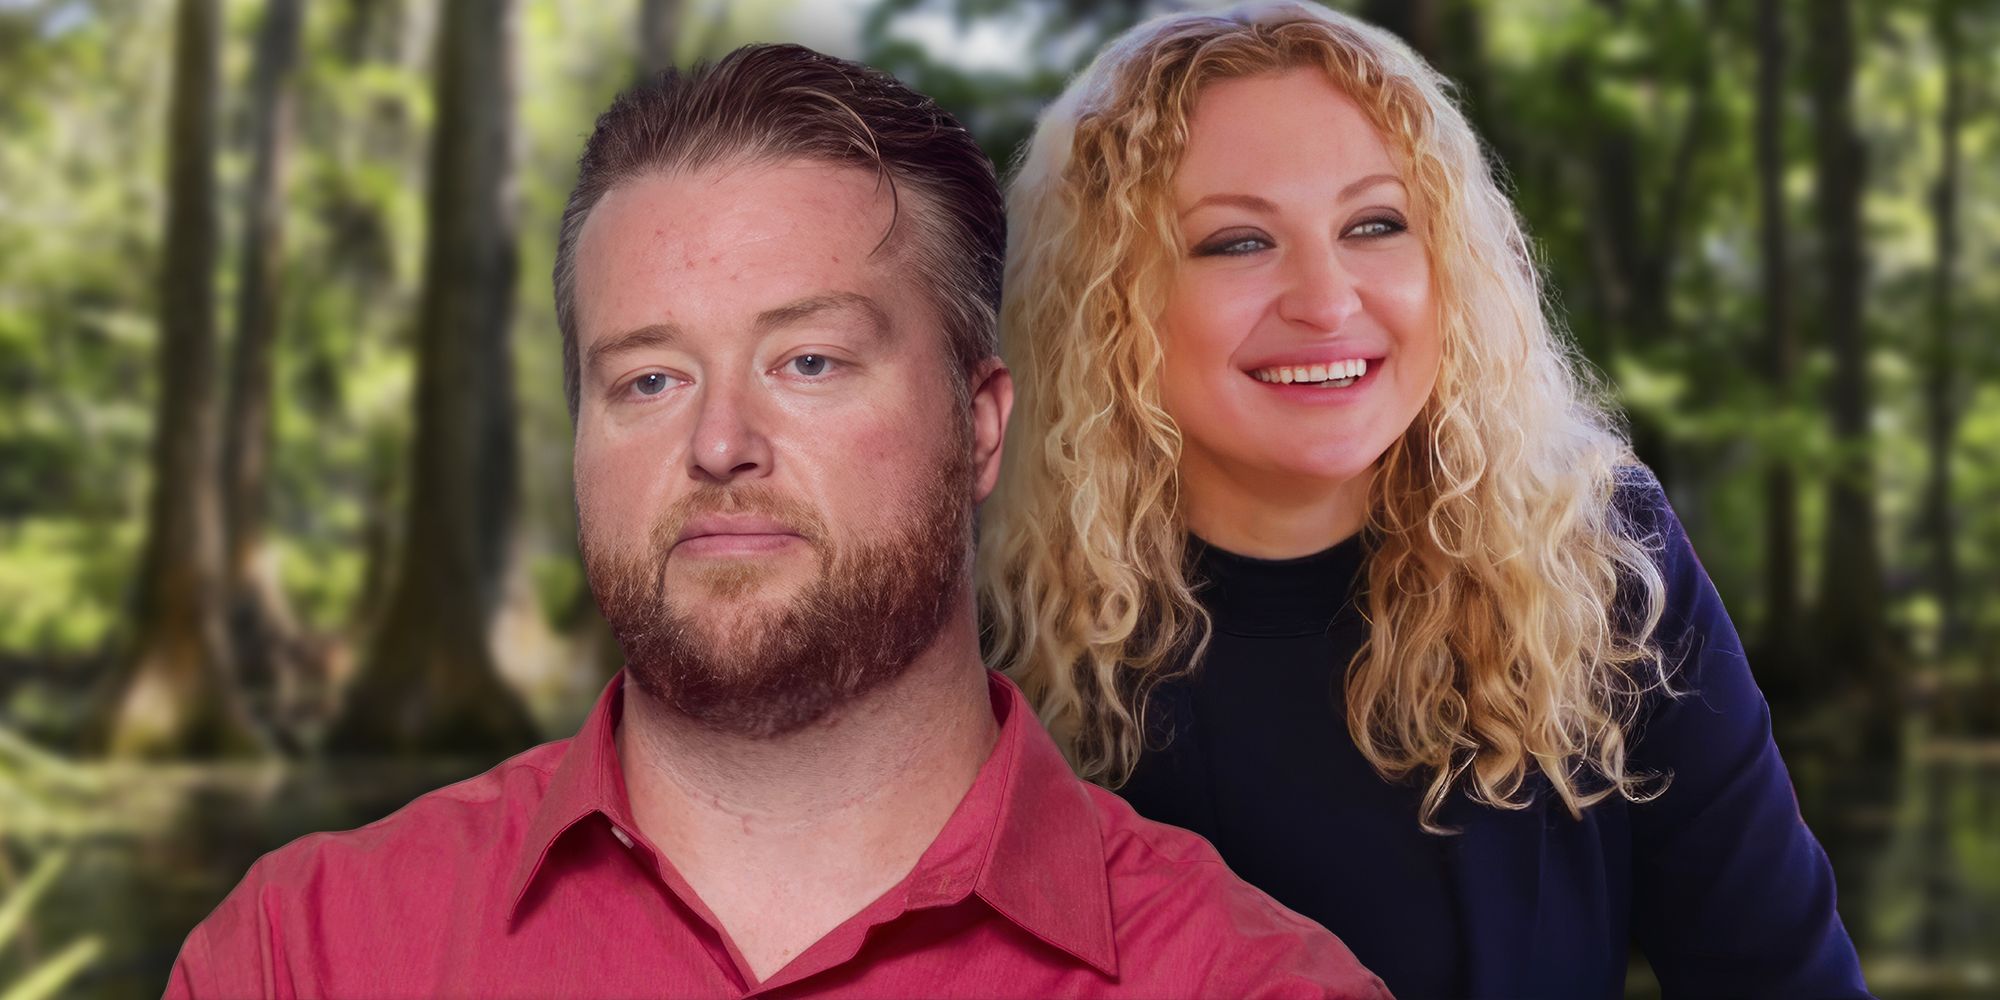 90 Day Fiance's Natalie Mordovtseva smiling & Mike Youngquist looking serious